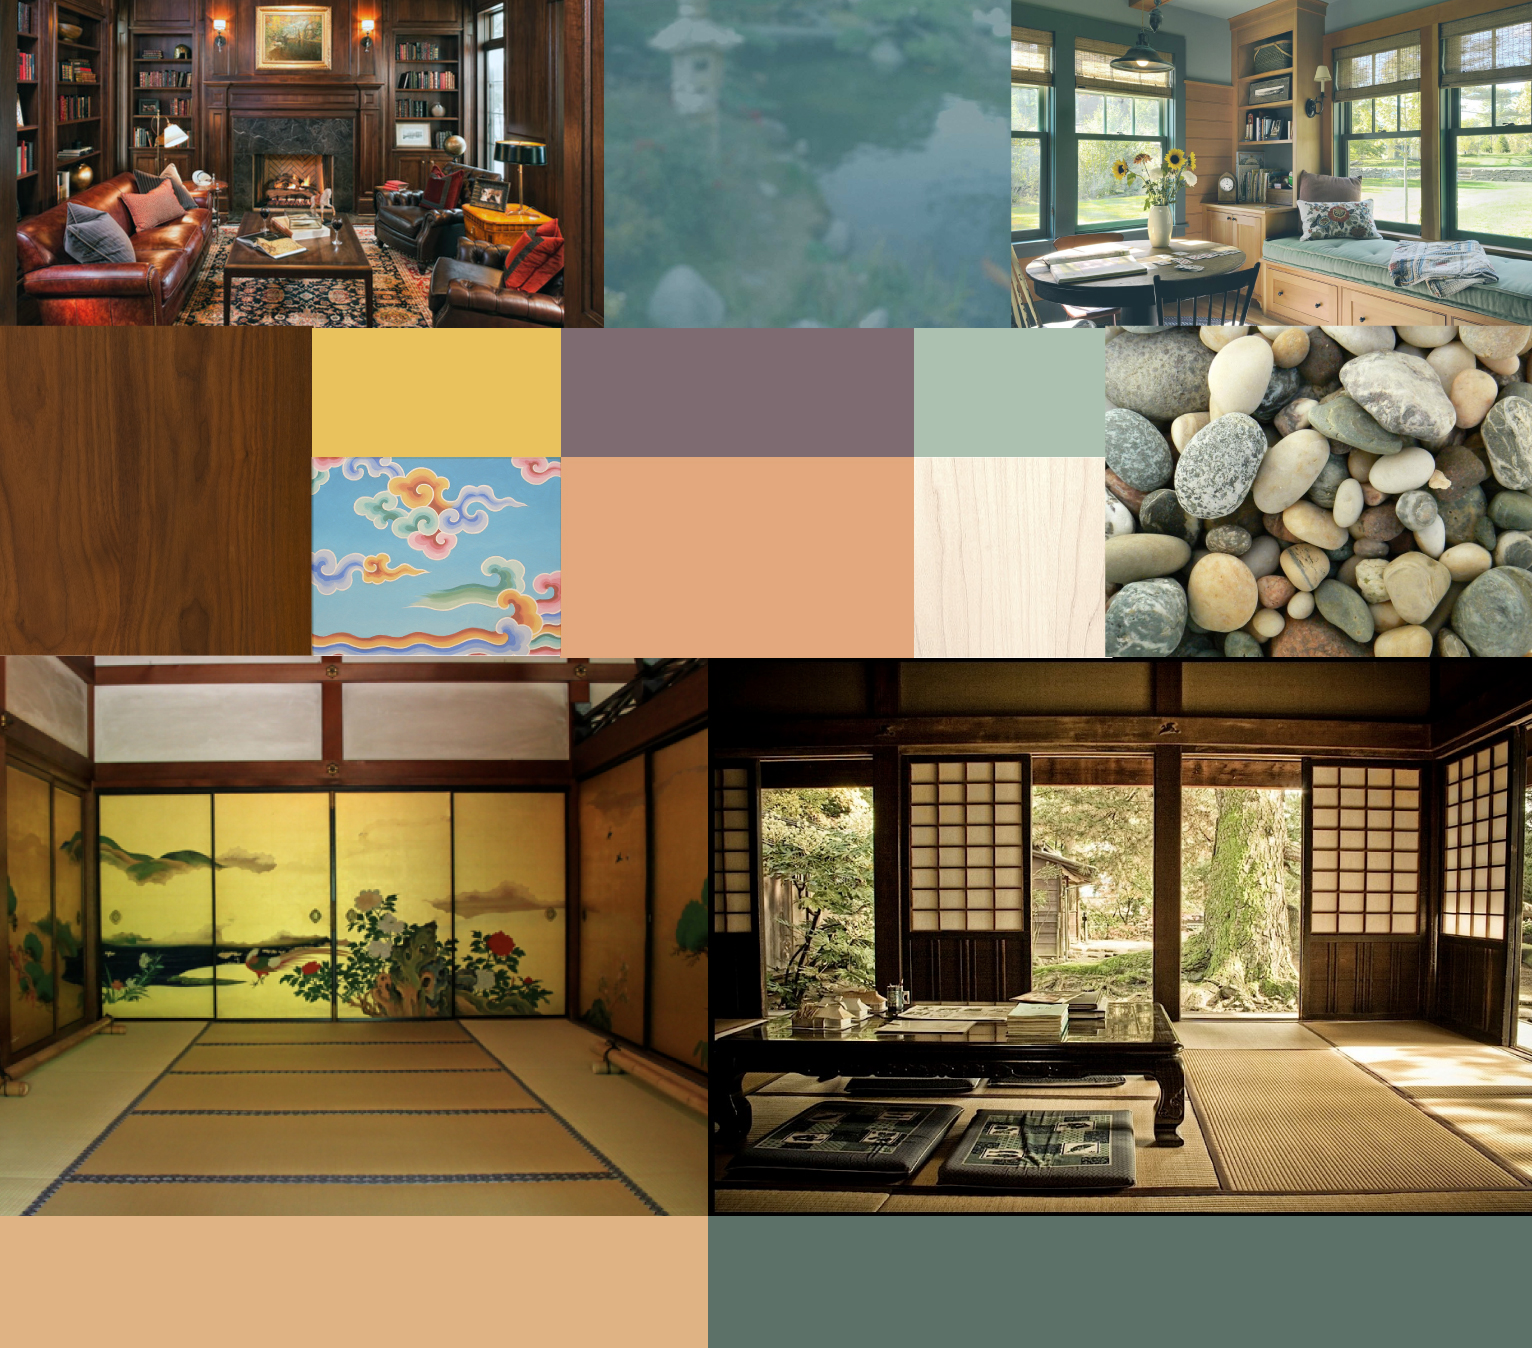 Mood board for the avatar environment